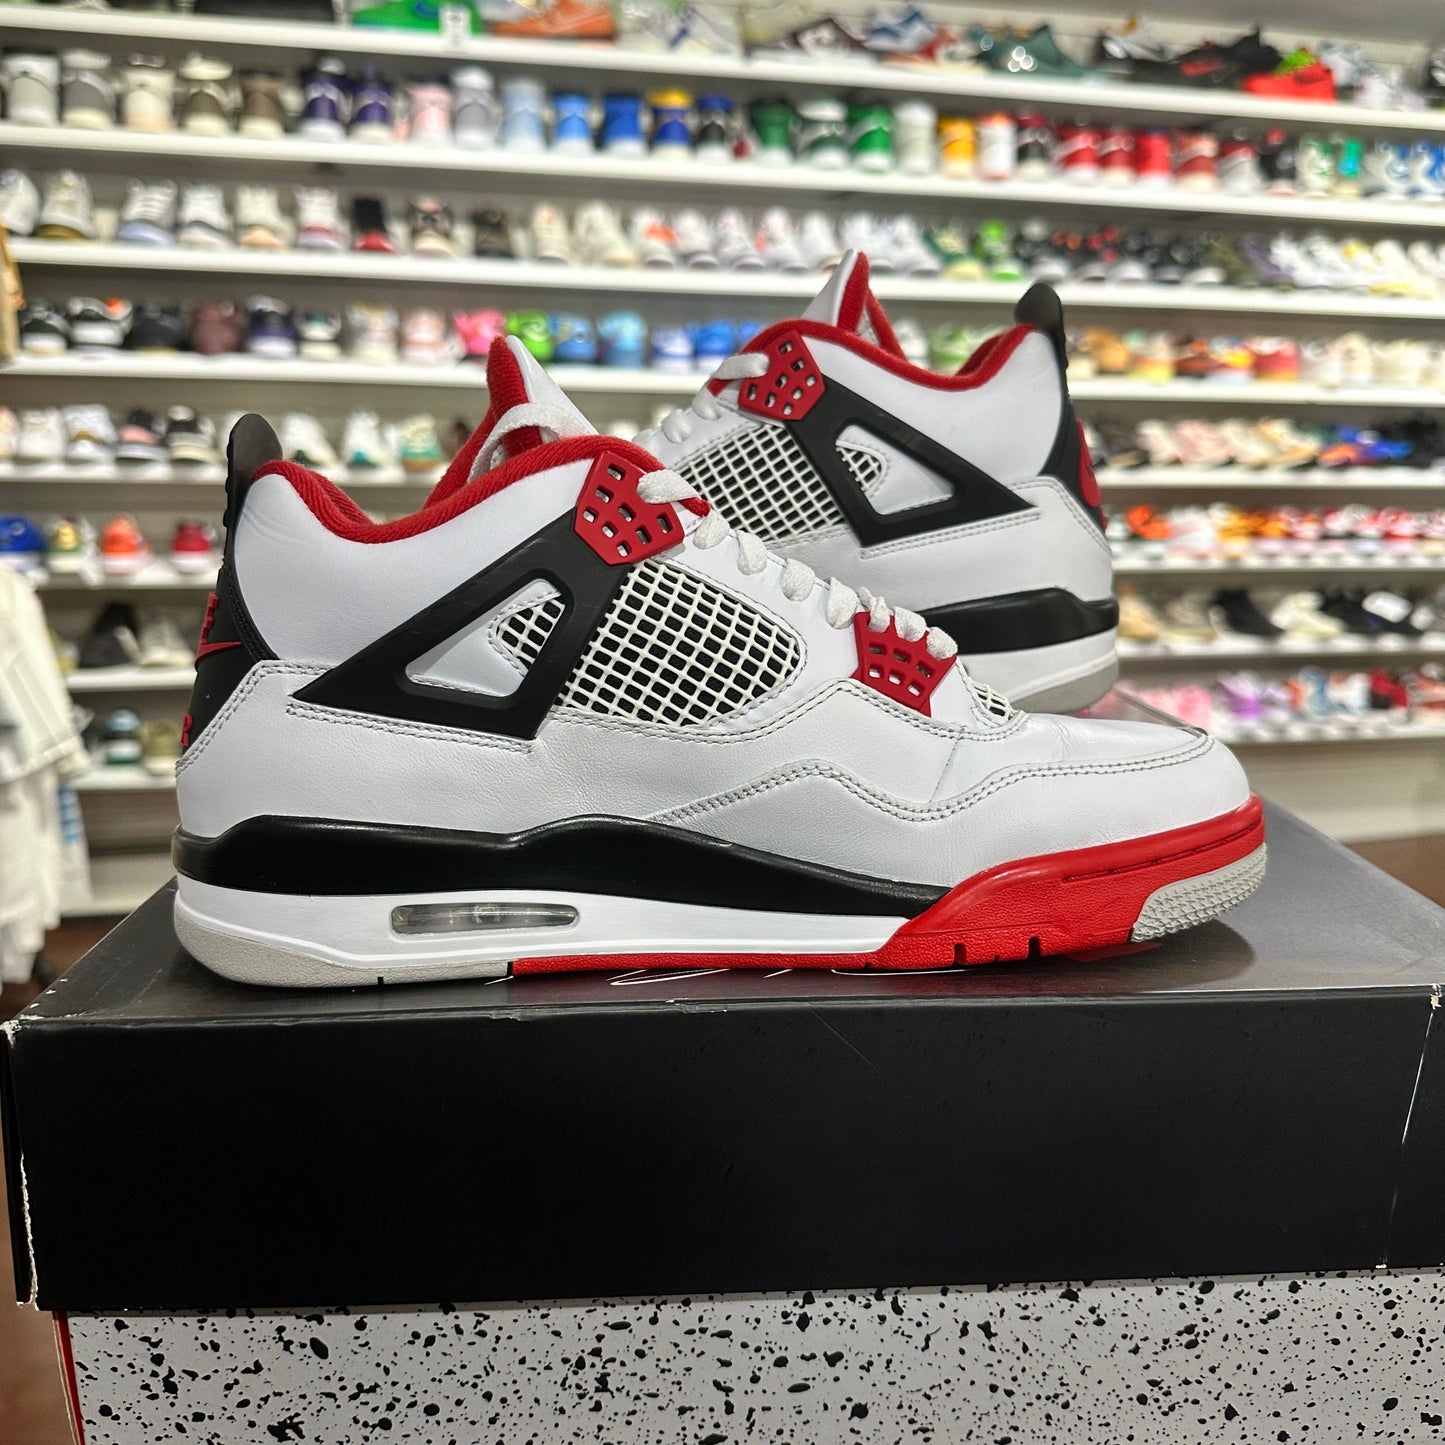 *USED* Air Jordan 4 Fire Red (size 9.5)